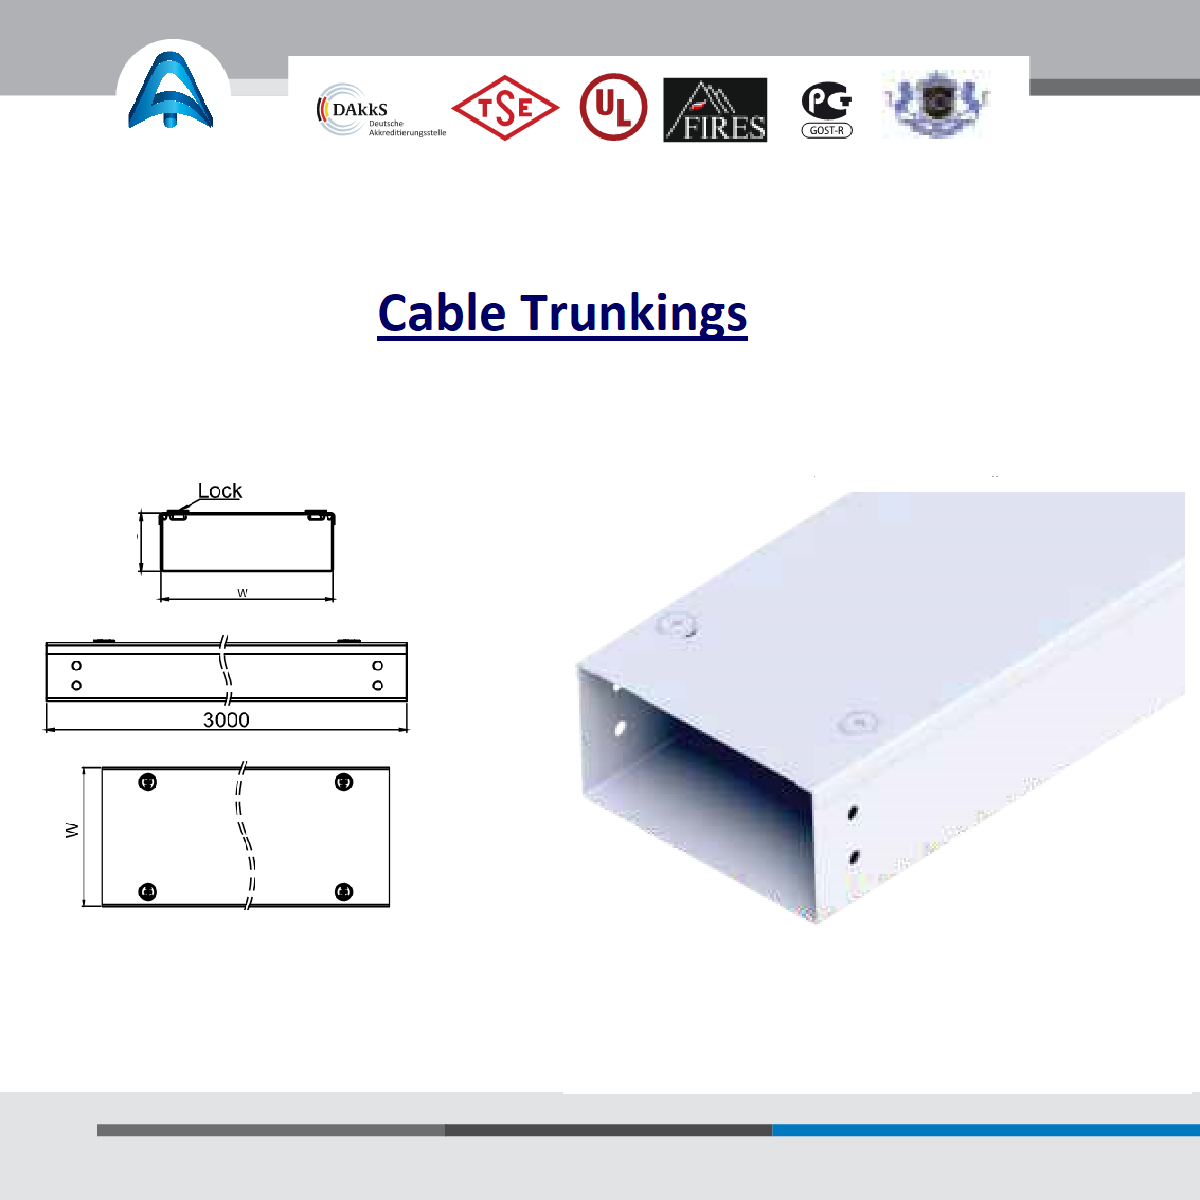 Cable Trunkings